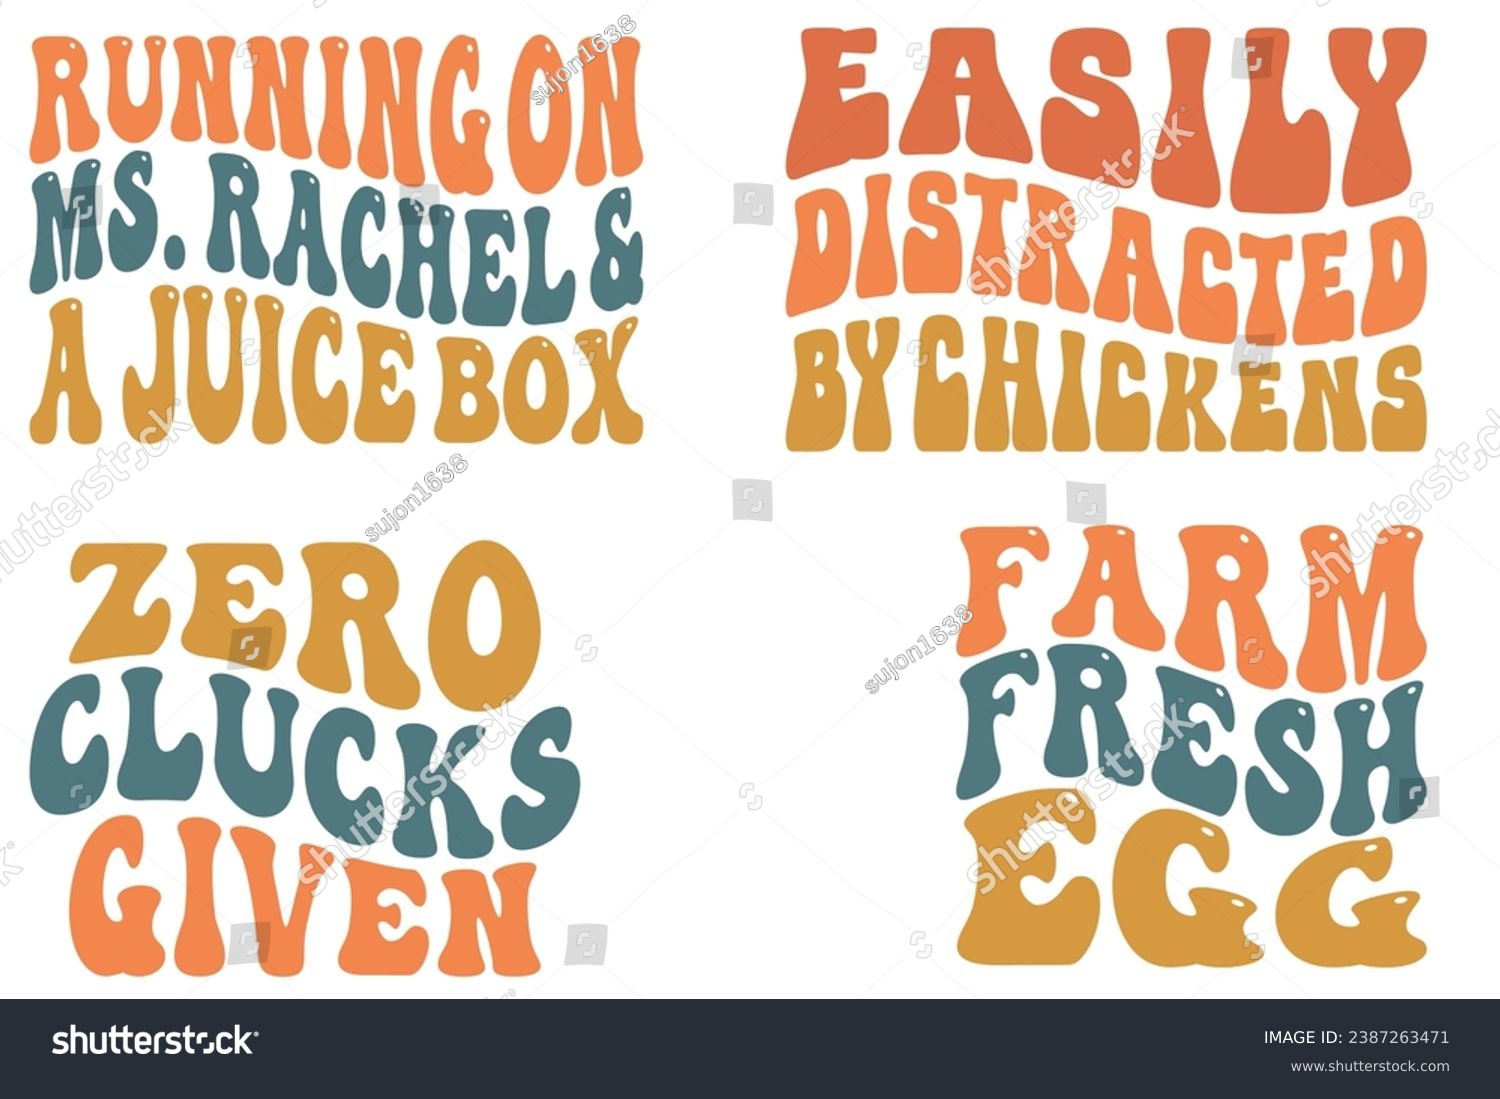 SVG of  Running on Ms. Rachel and a Juice Box, Easily Distracted by Chickens, Farm Fresh Egg, zero clucks given retro wavy T-shirt designs svg